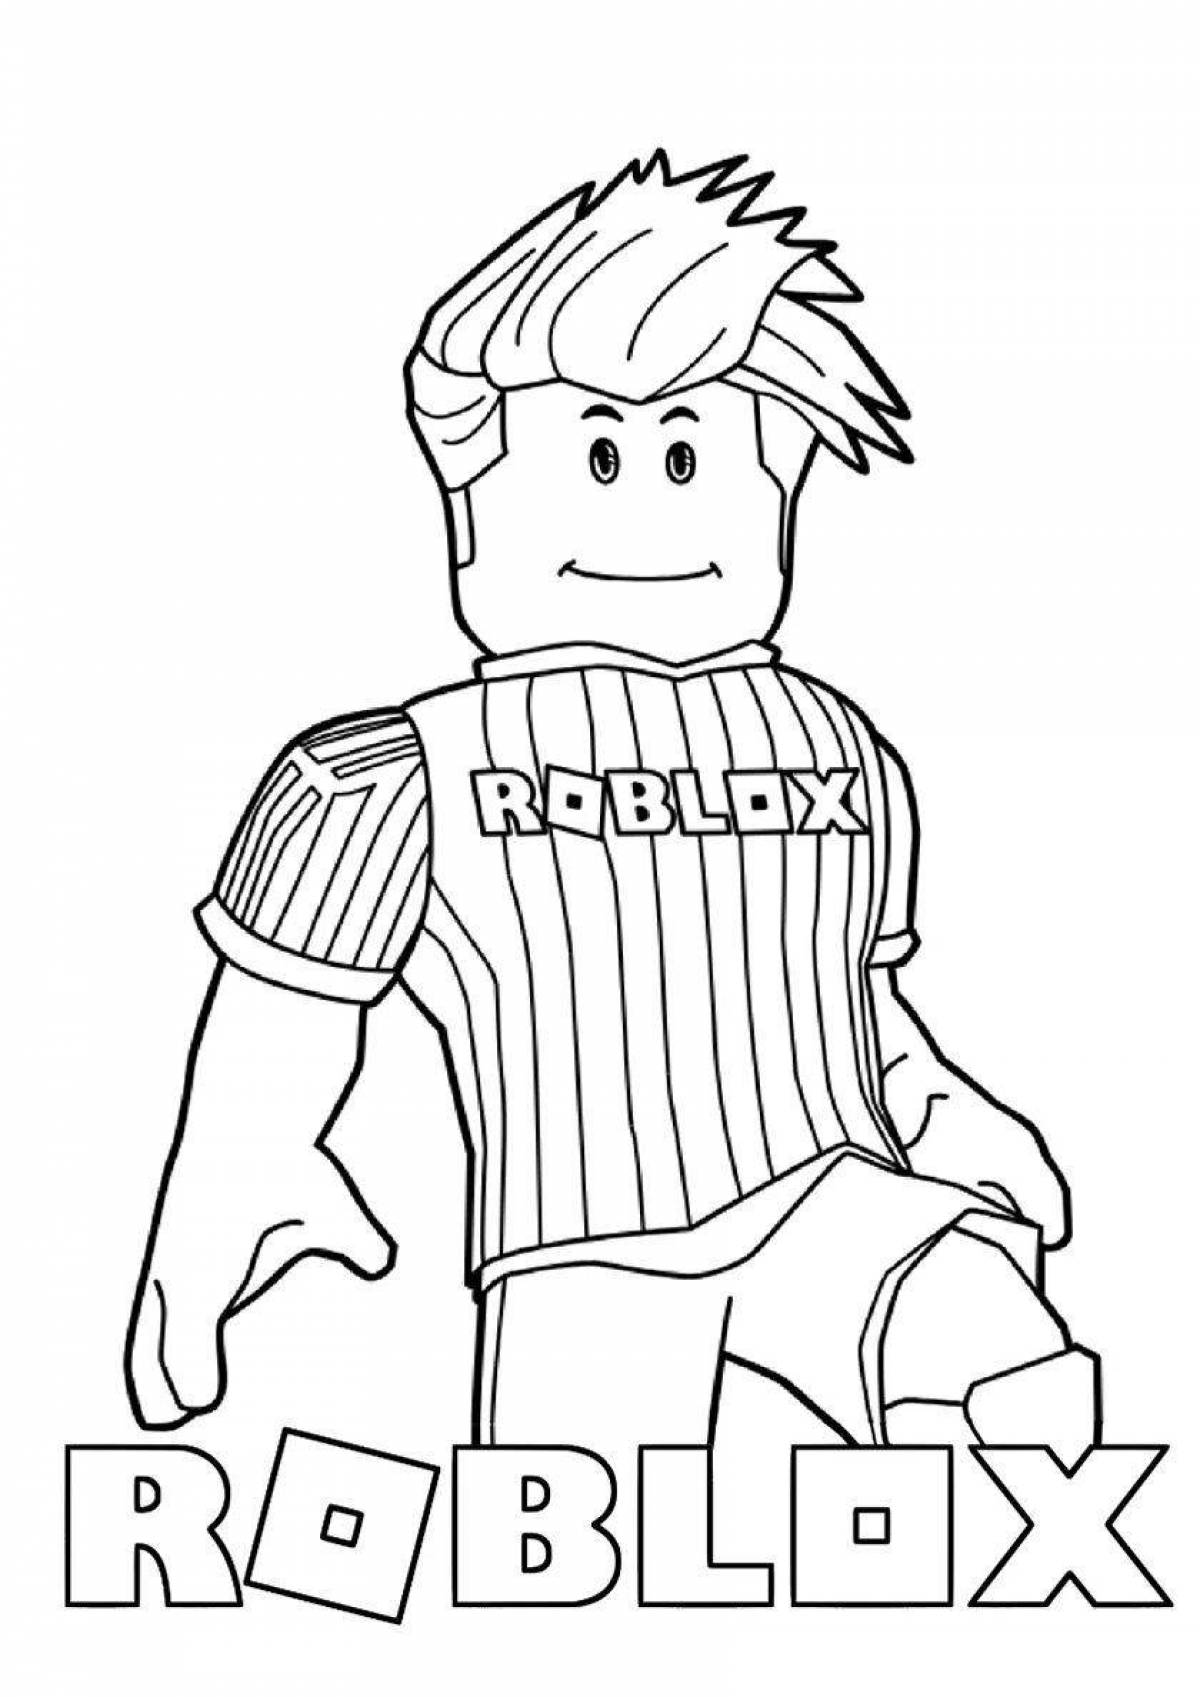 Robloxers innovative coloring pages